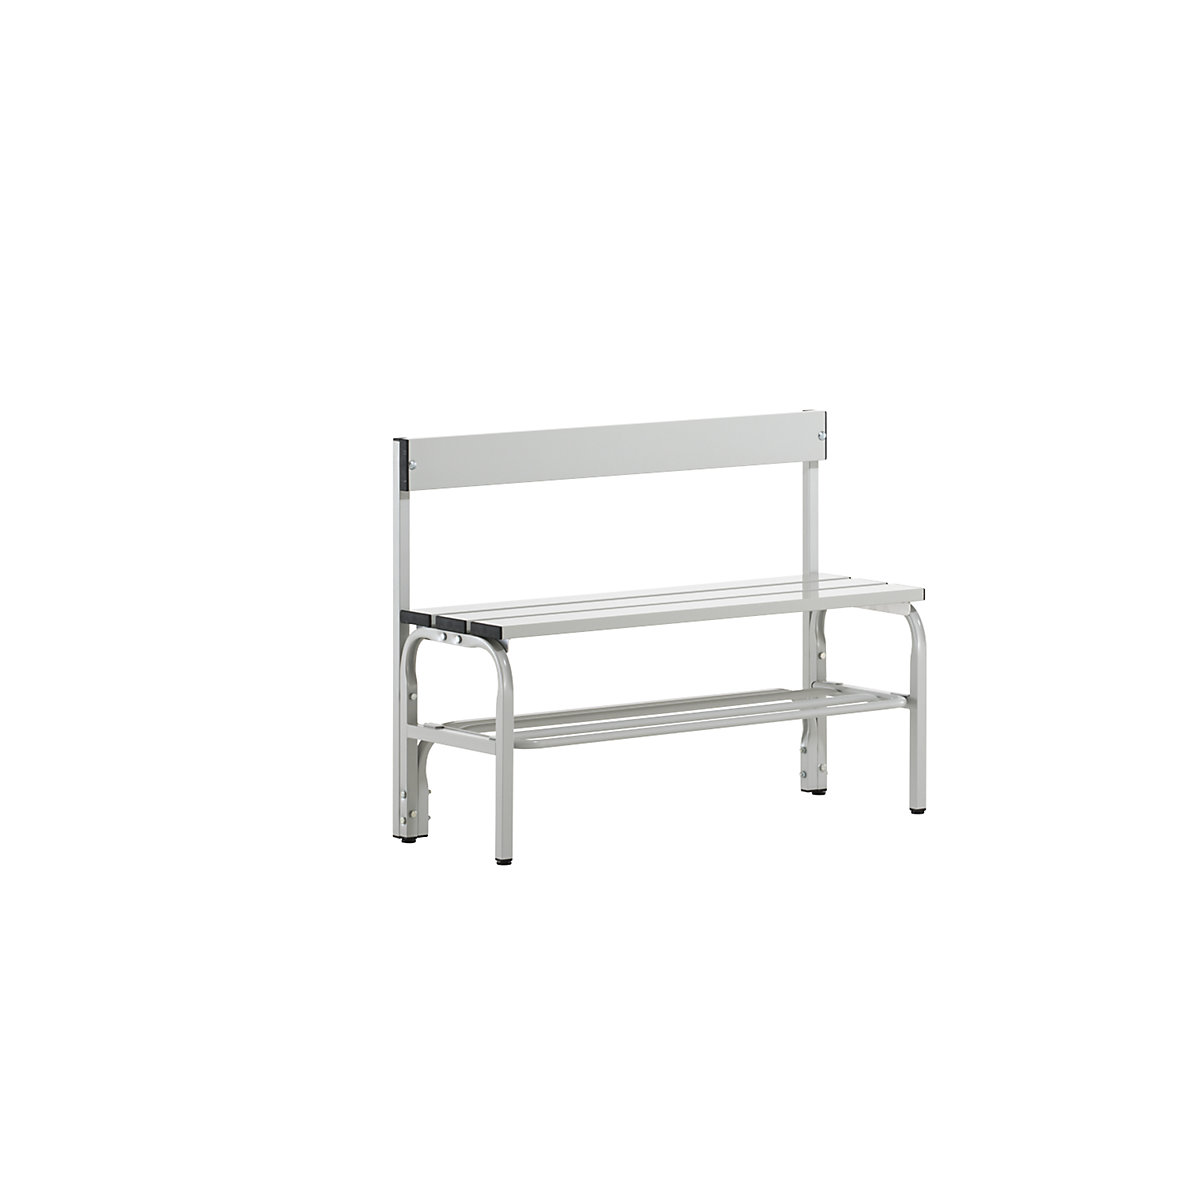 Sypro – Half height cloakroom bench with back rest, single-sided, aluminium, length 1015 mm, light grey, shoe rack